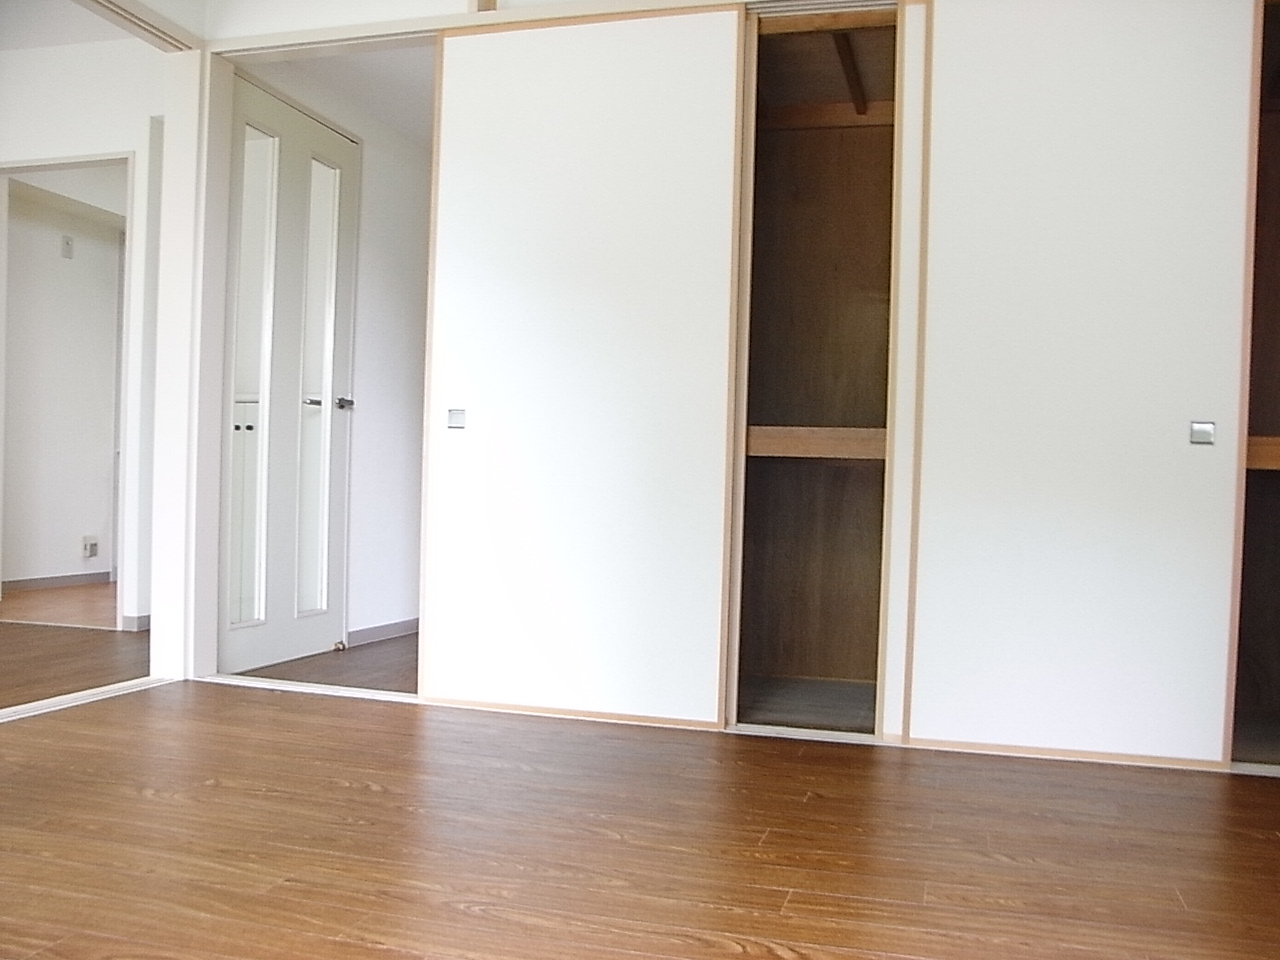 Other room space. Bright south-facing Western-style